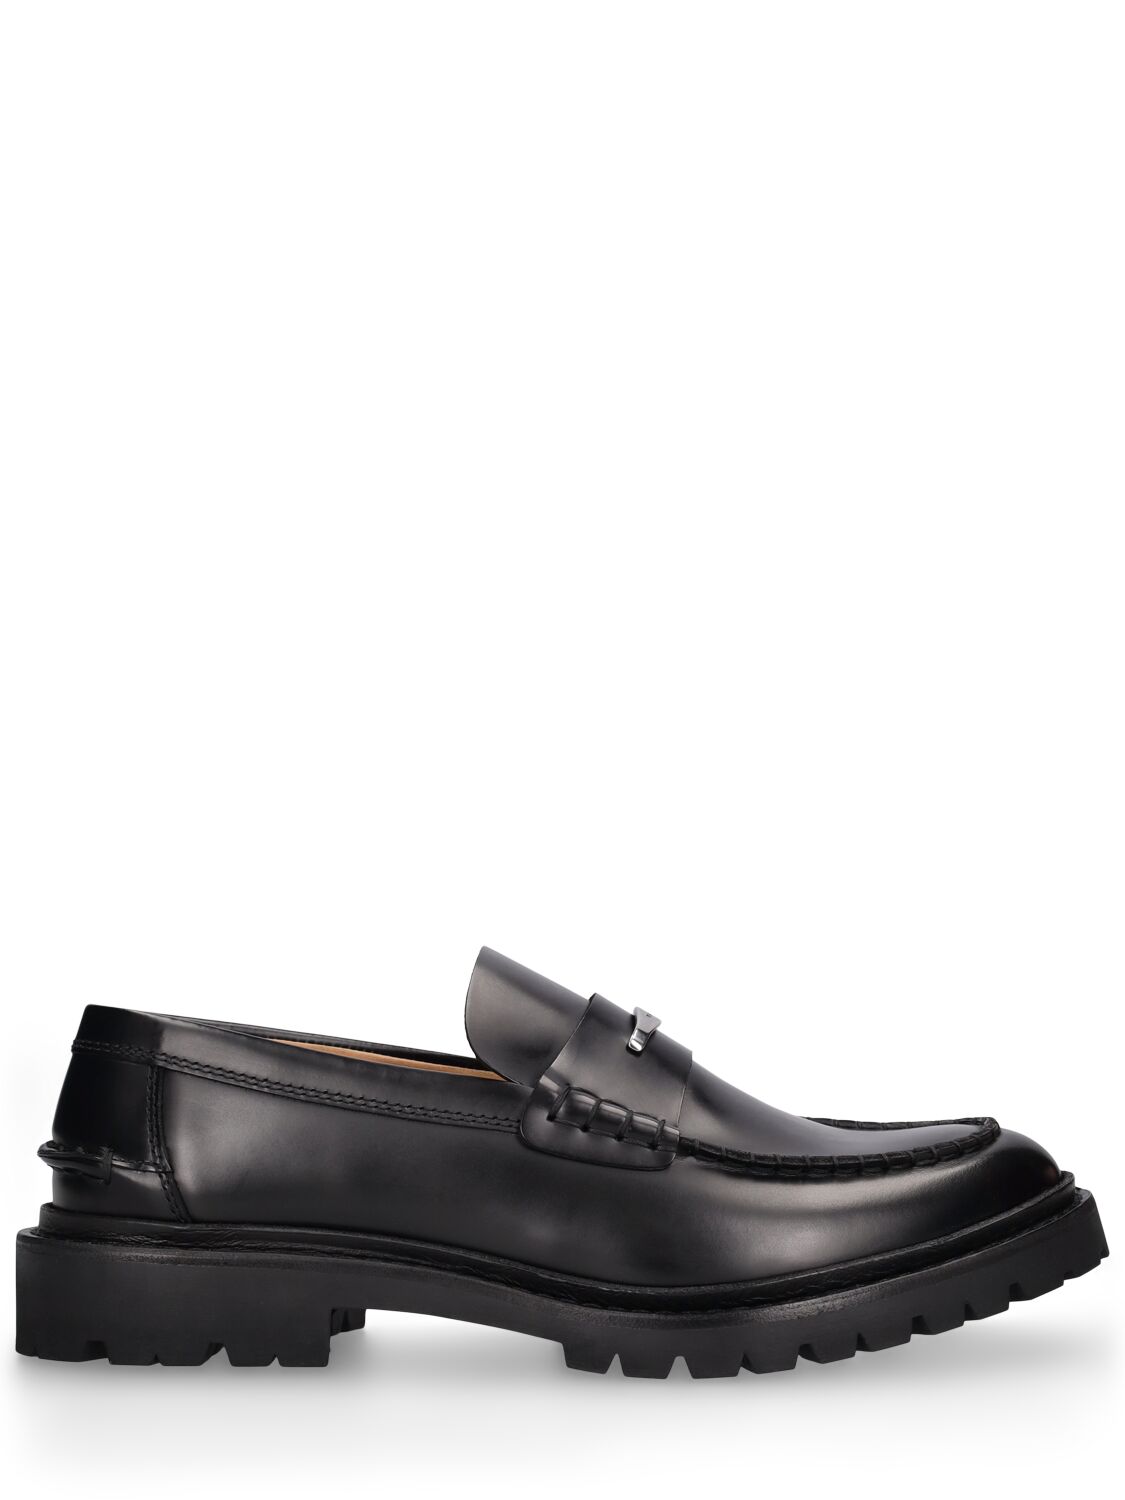 Marant Frezzah Leather Chunky Loafers In Black